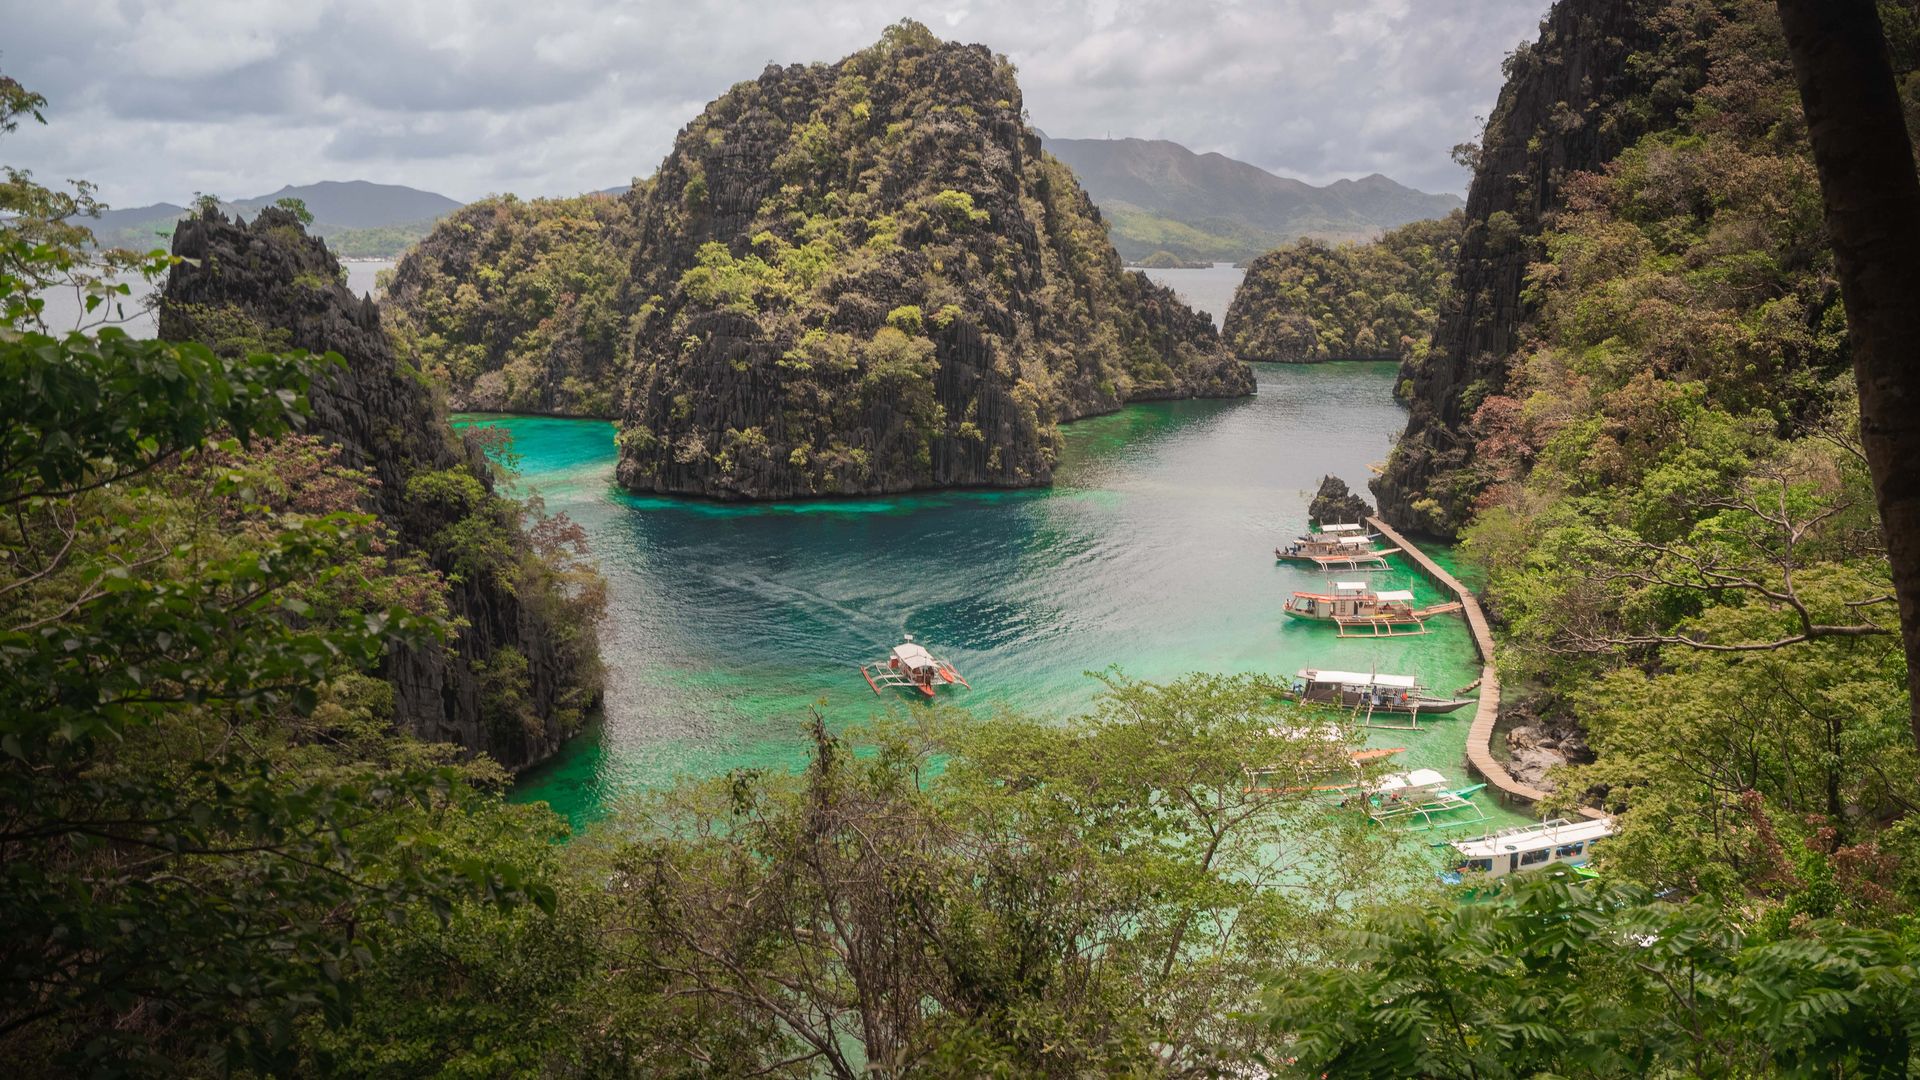 A trip to Coron, Palawan, would not be complete without capturing a photo of these limestone karsts and turquoise waters from a view deck that tourists to the island usually visit. PHOTO: VINA SALAZAR